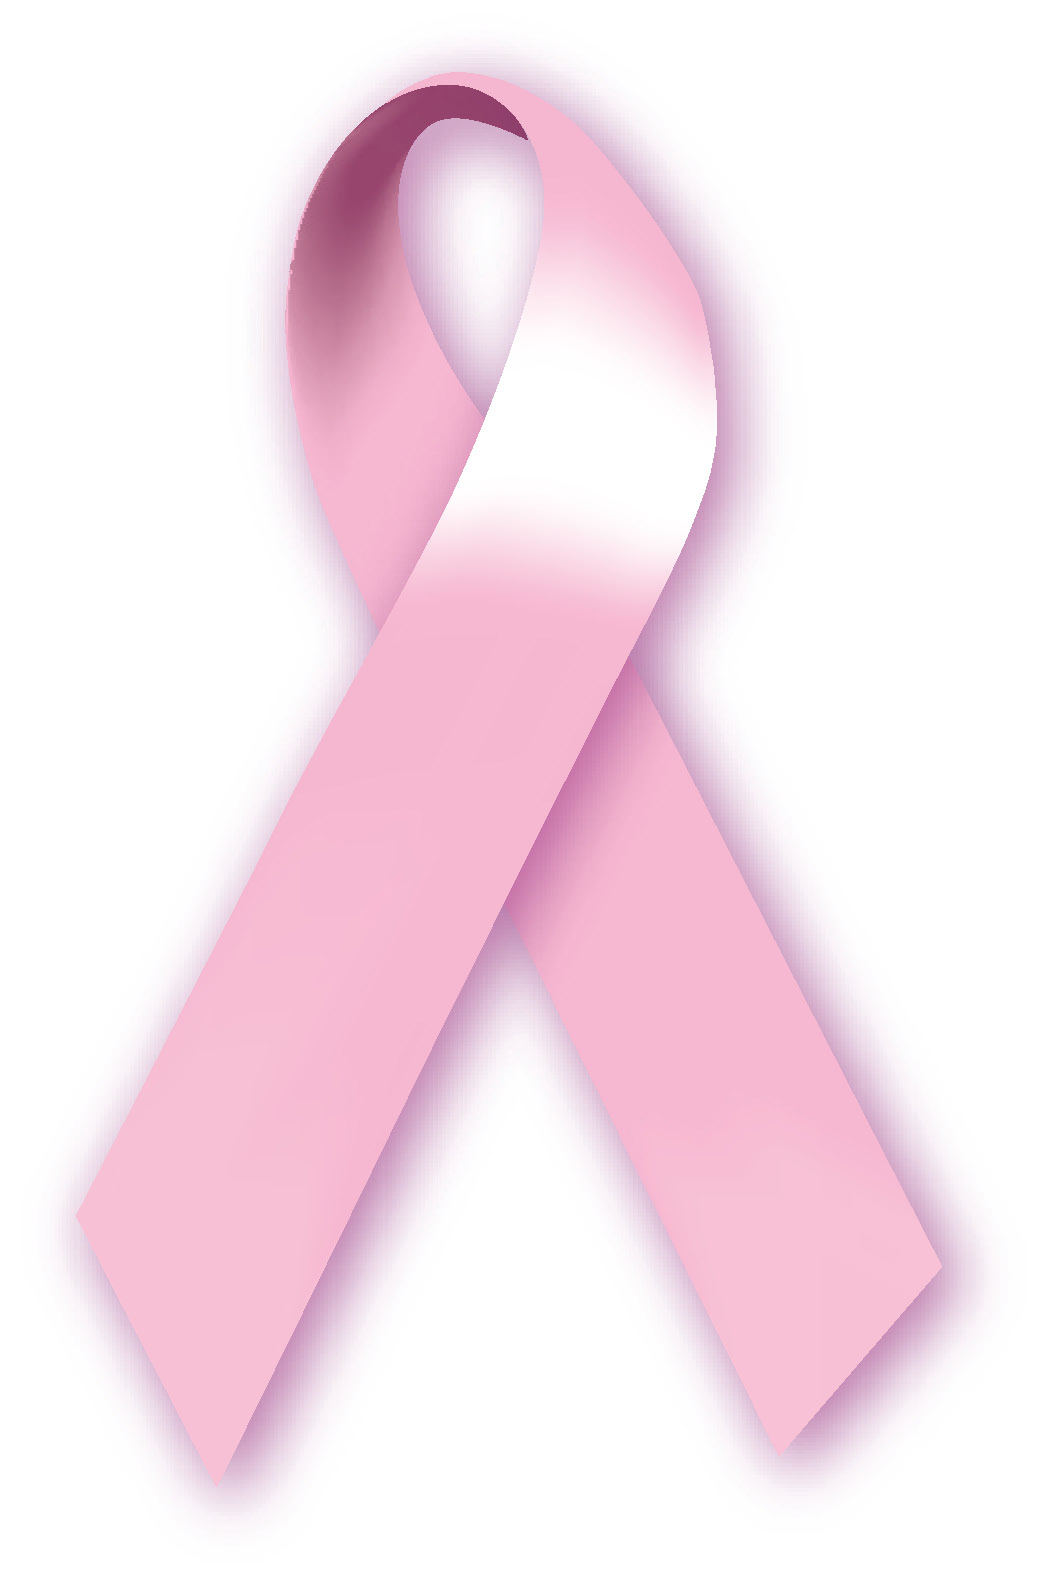 The Pink Ribbon And Breast Cancer Awareness   Home Care Assistance Of